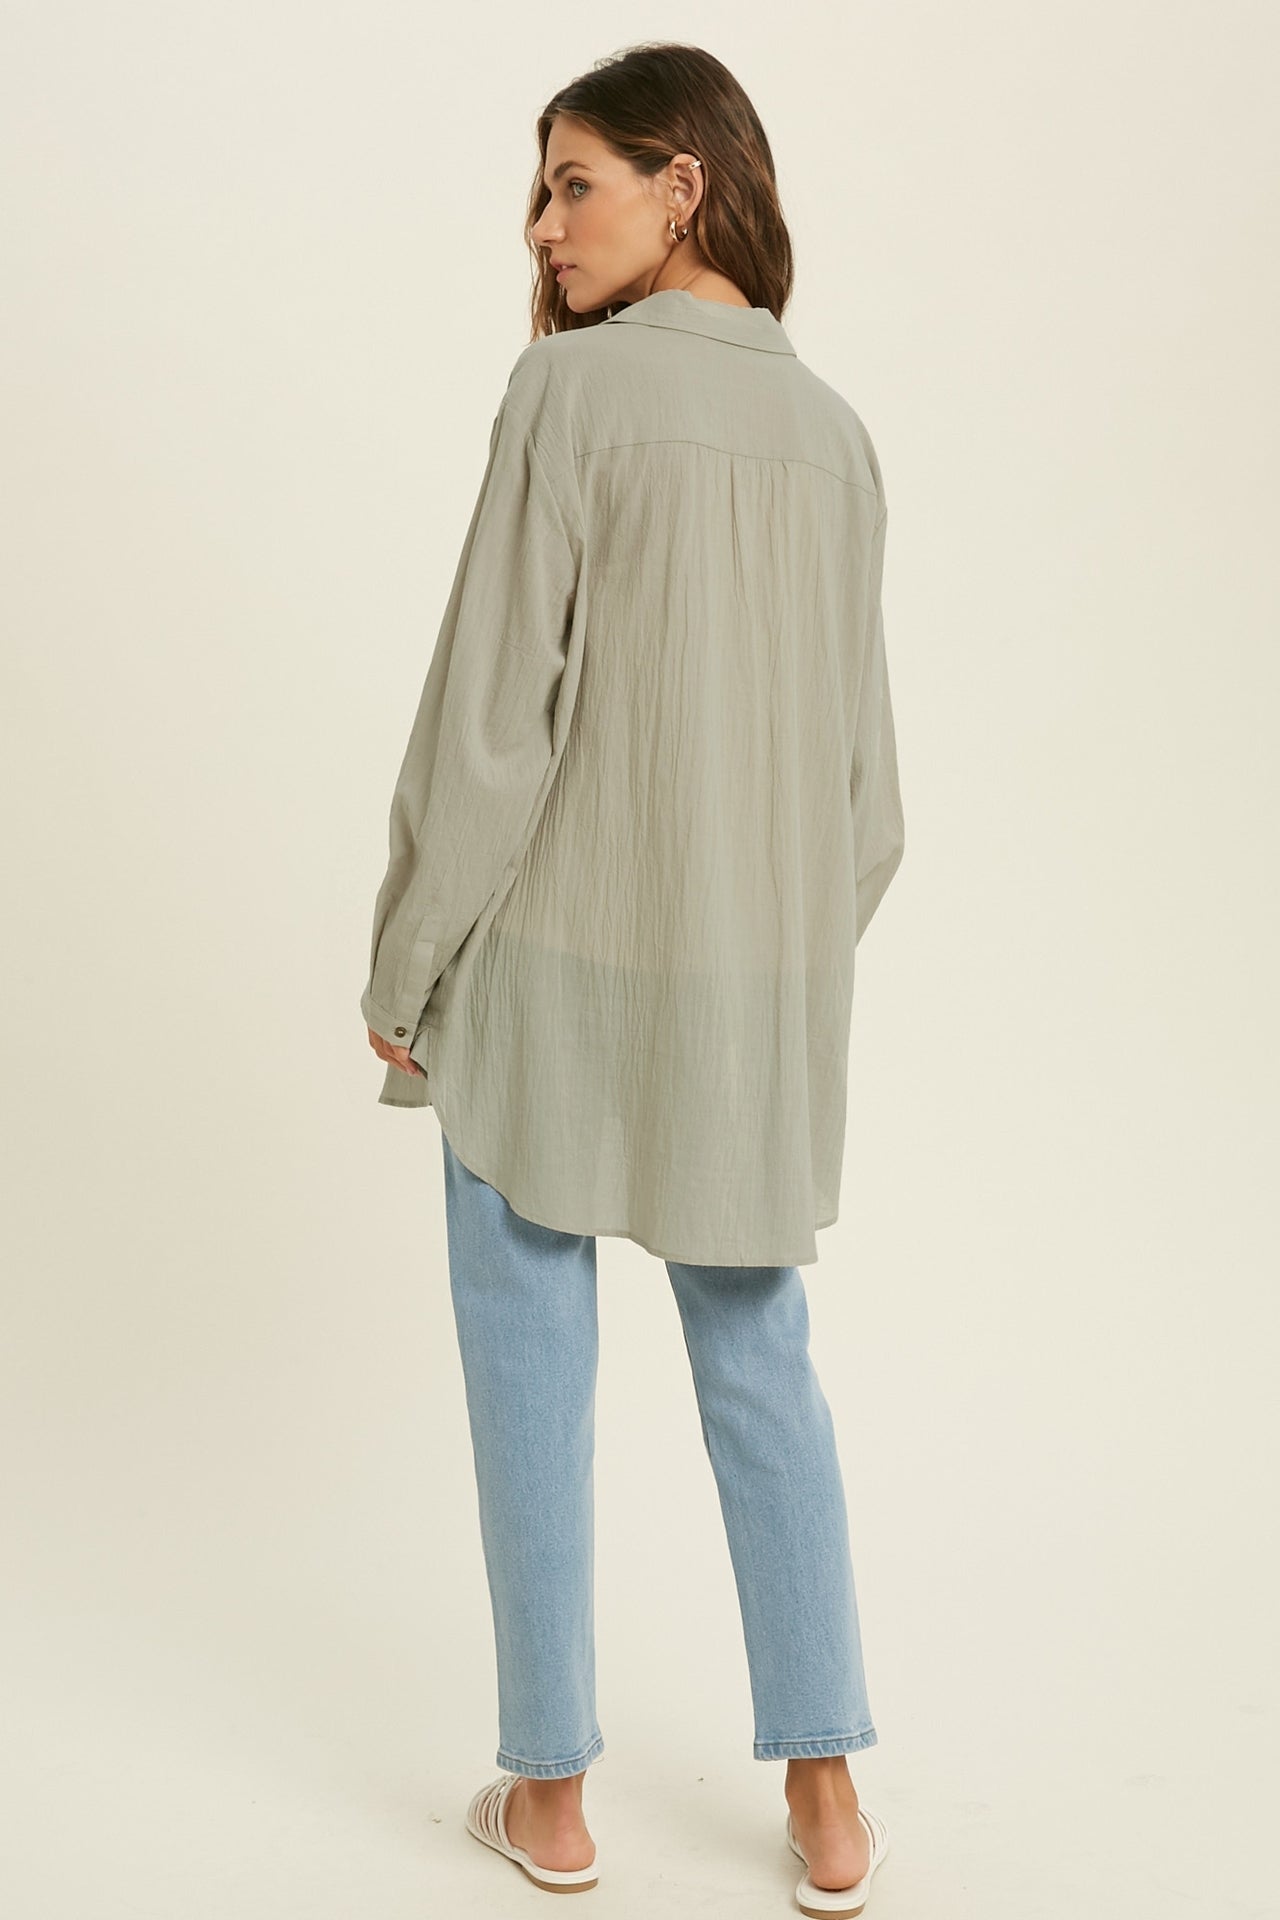 Showing a model wearing the Button Down Tunic Top in sage color. A back view.